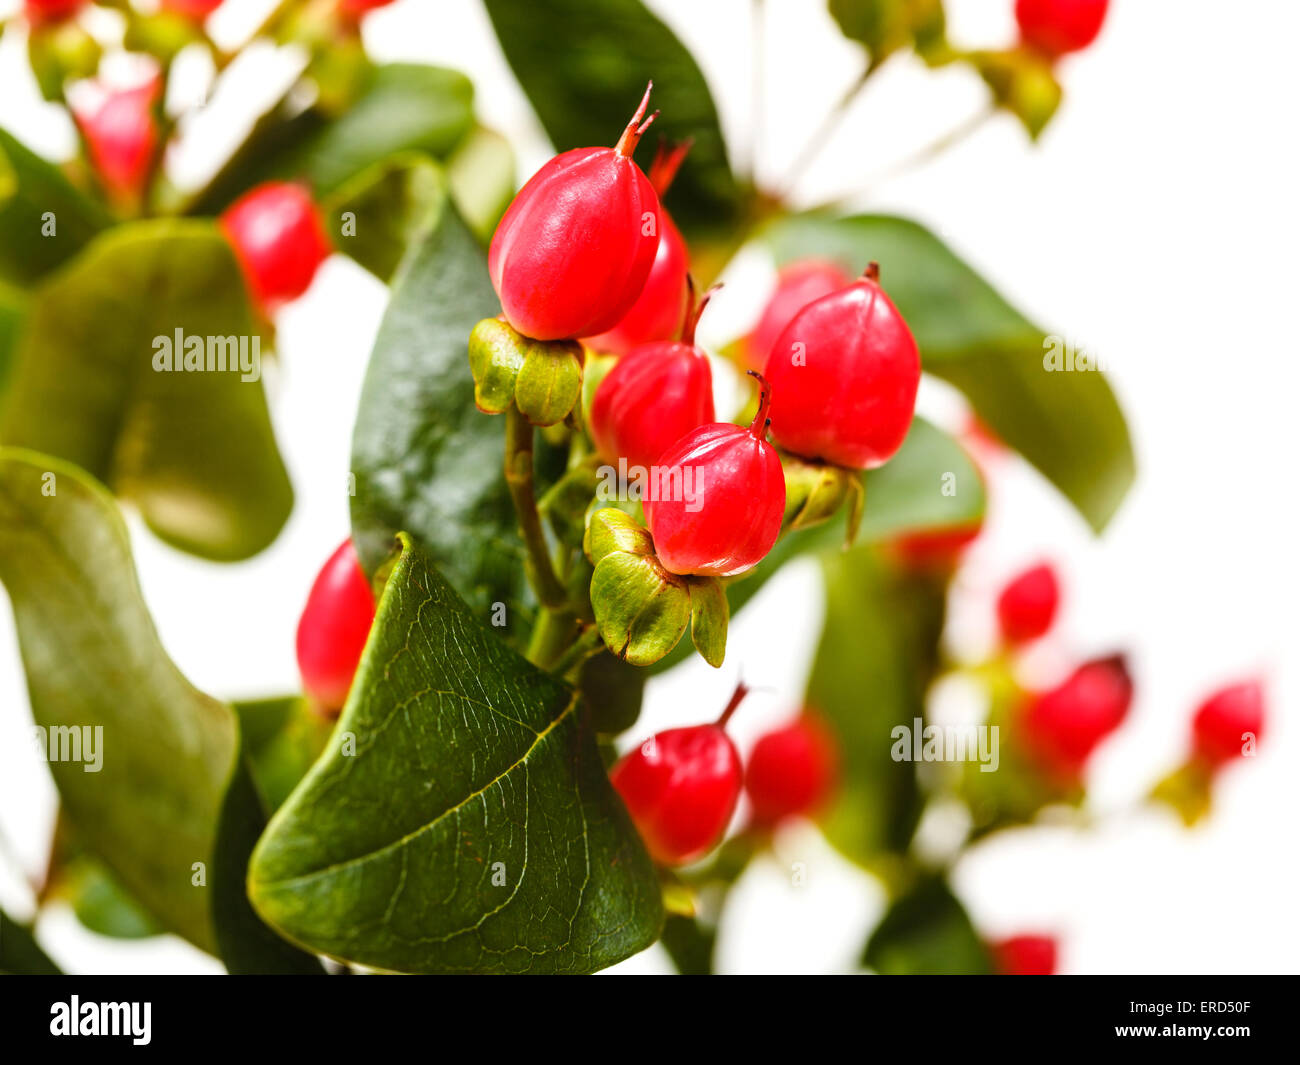 red fruits of hypericum flower close up Stock Photo